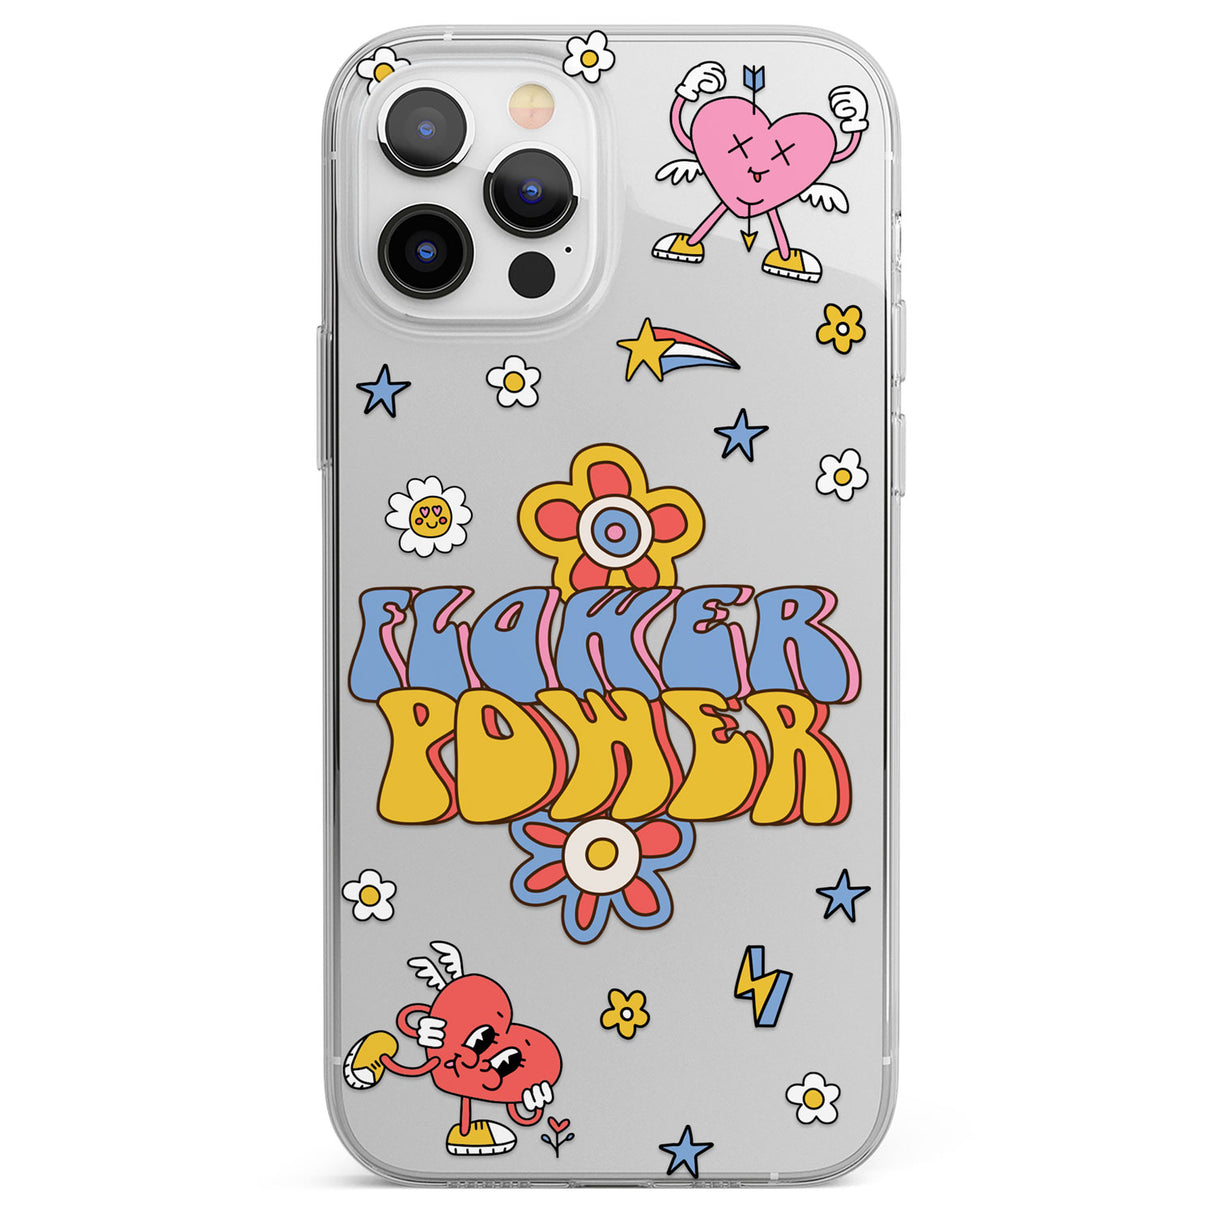 Flower Power Phone Case for iPhone 12 Pro